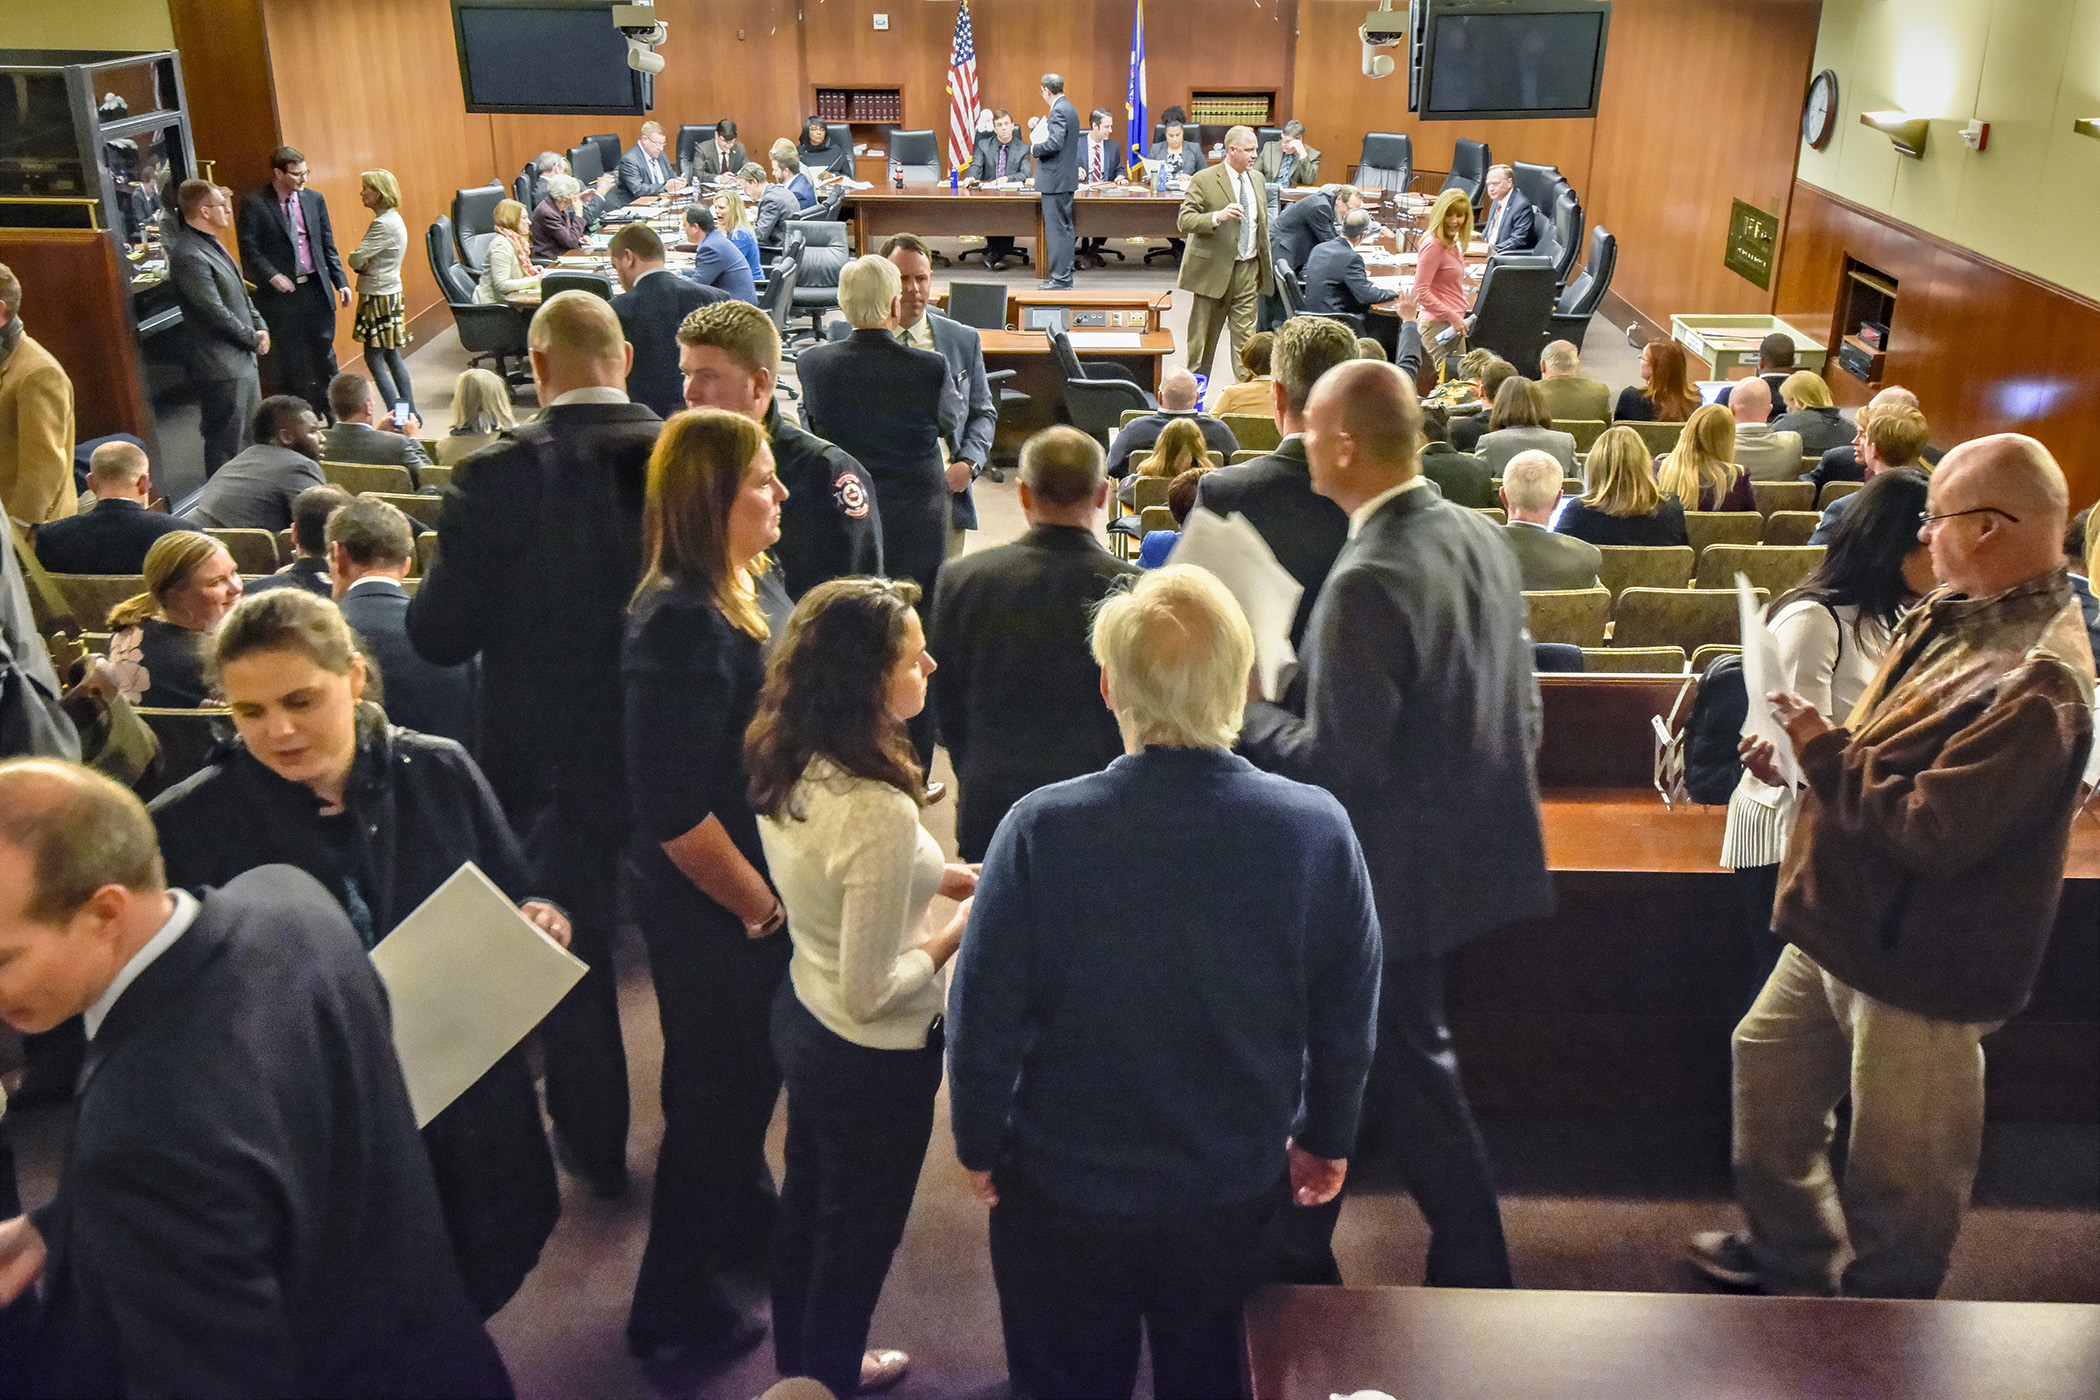 A flurry of activity in the hearing room moments before the House Job Growth and Energy Affordability Policy and Finance Committee convened April 18 for a walk-through of the omnibus job growth and energy affordability finance bill. Photo by Andrew VonBank